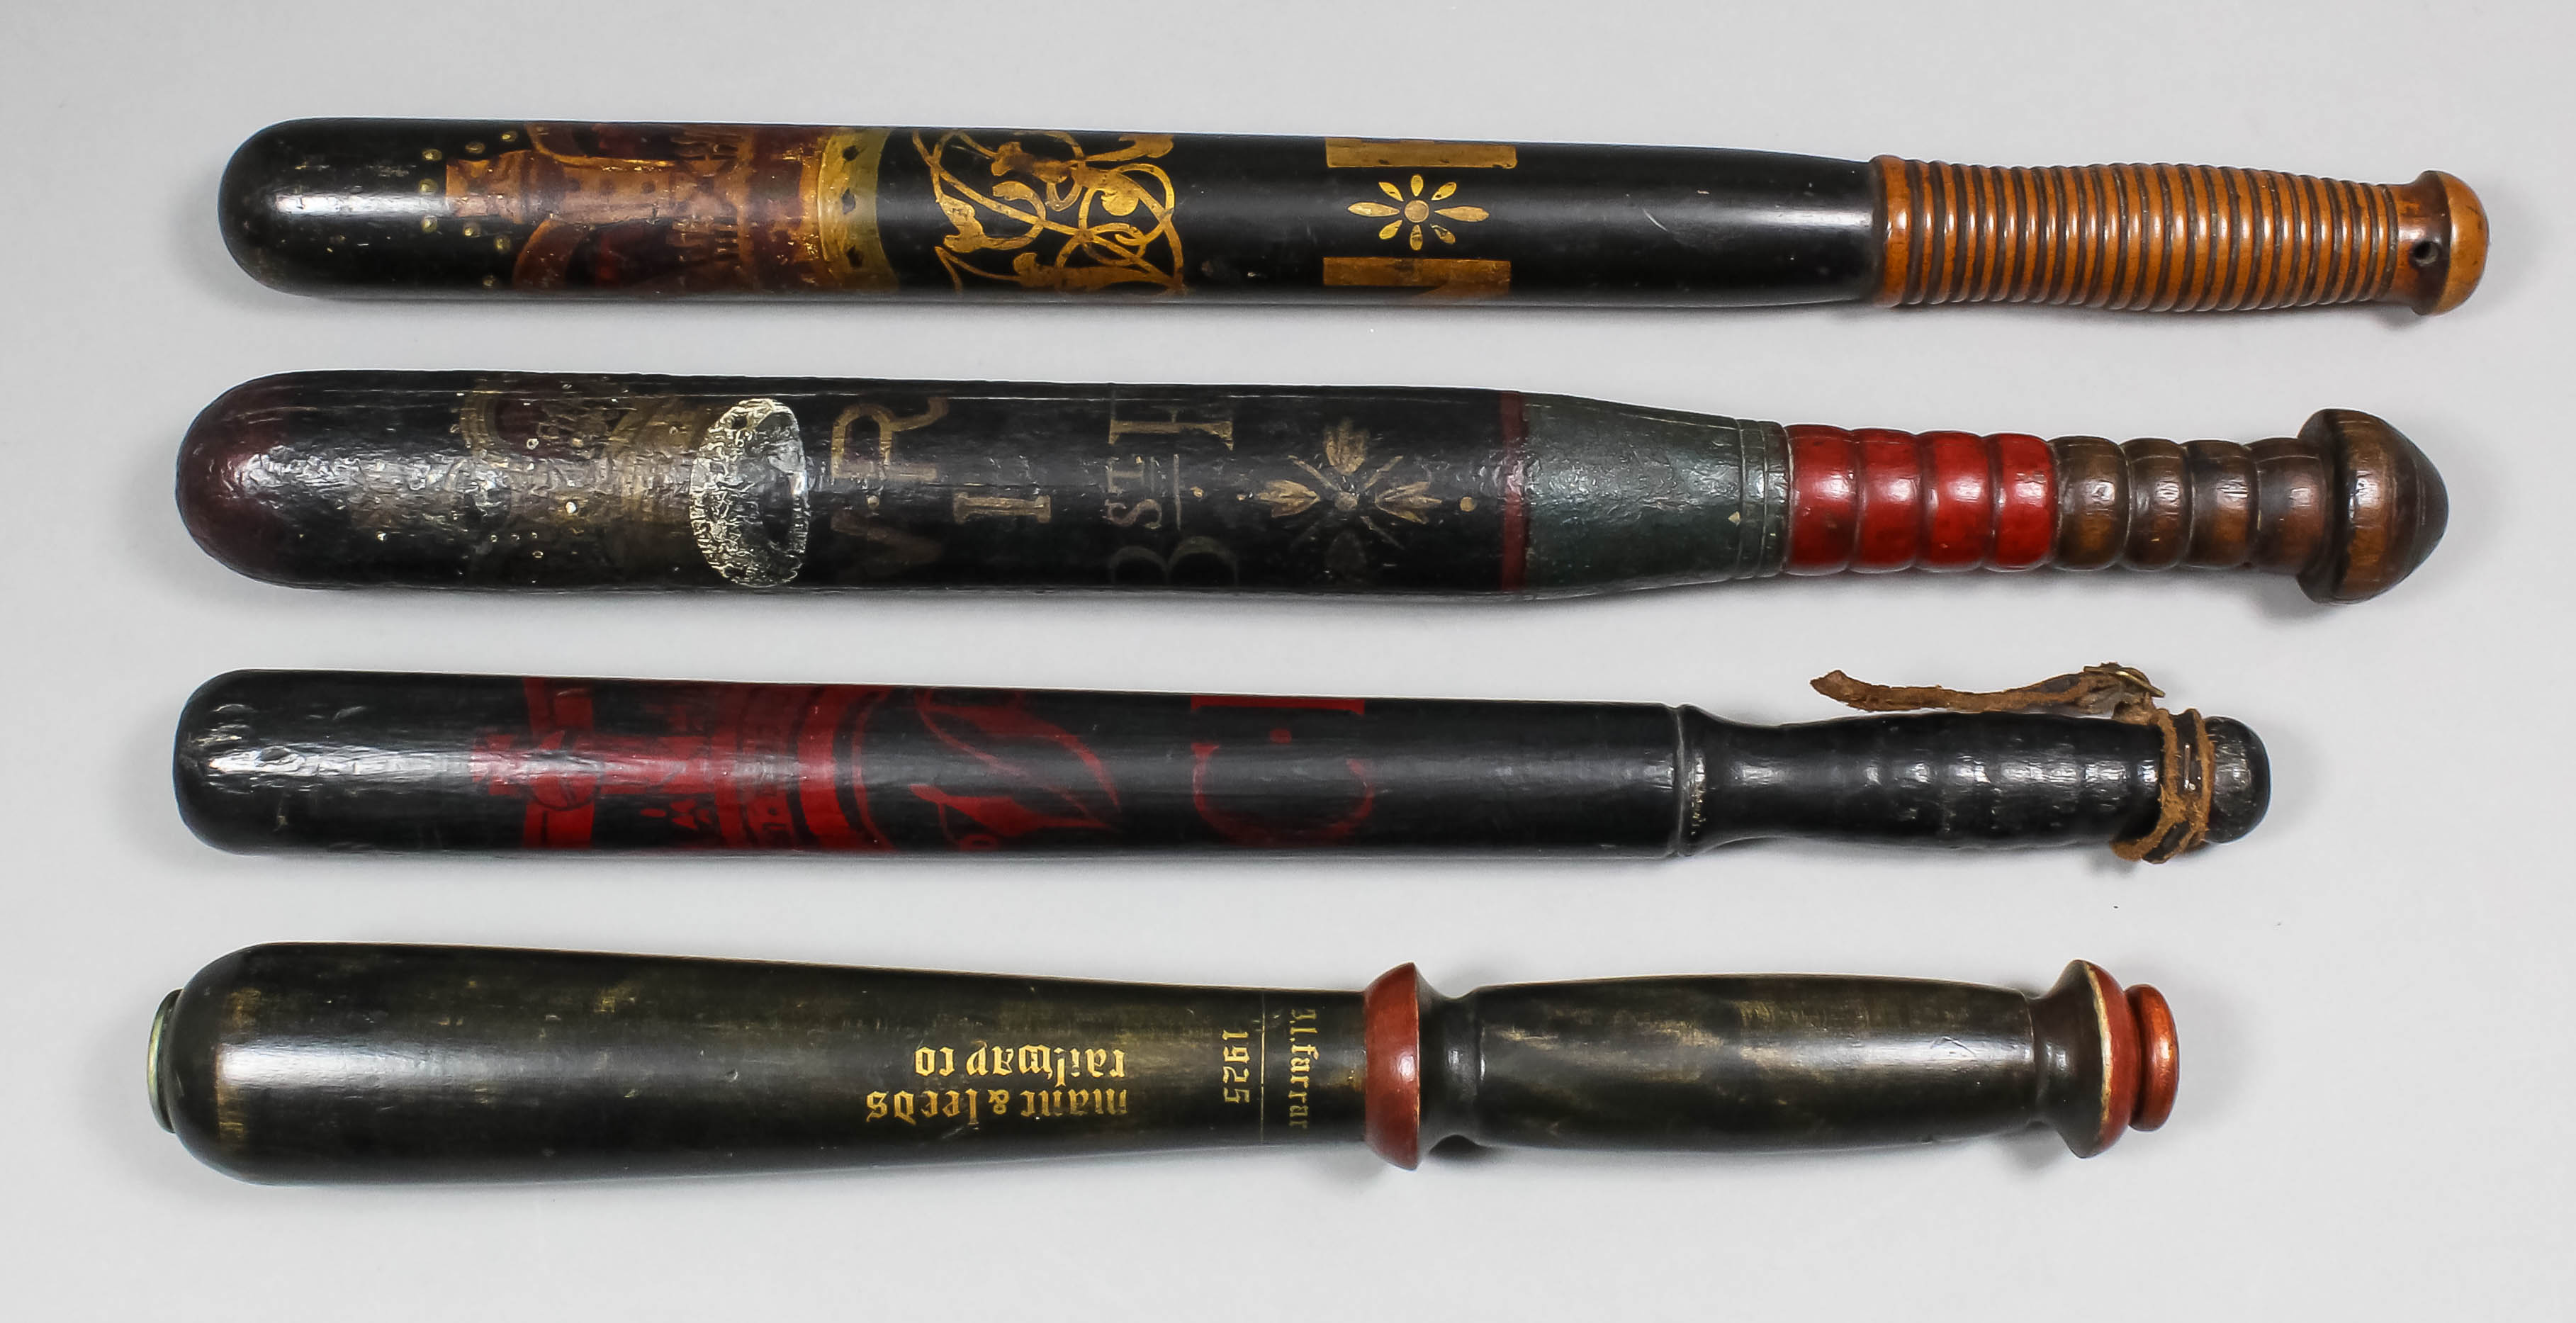 A Victorian turned wood truncheon painted with a crown over the royal cipher above "I.Bst.E.RY." (